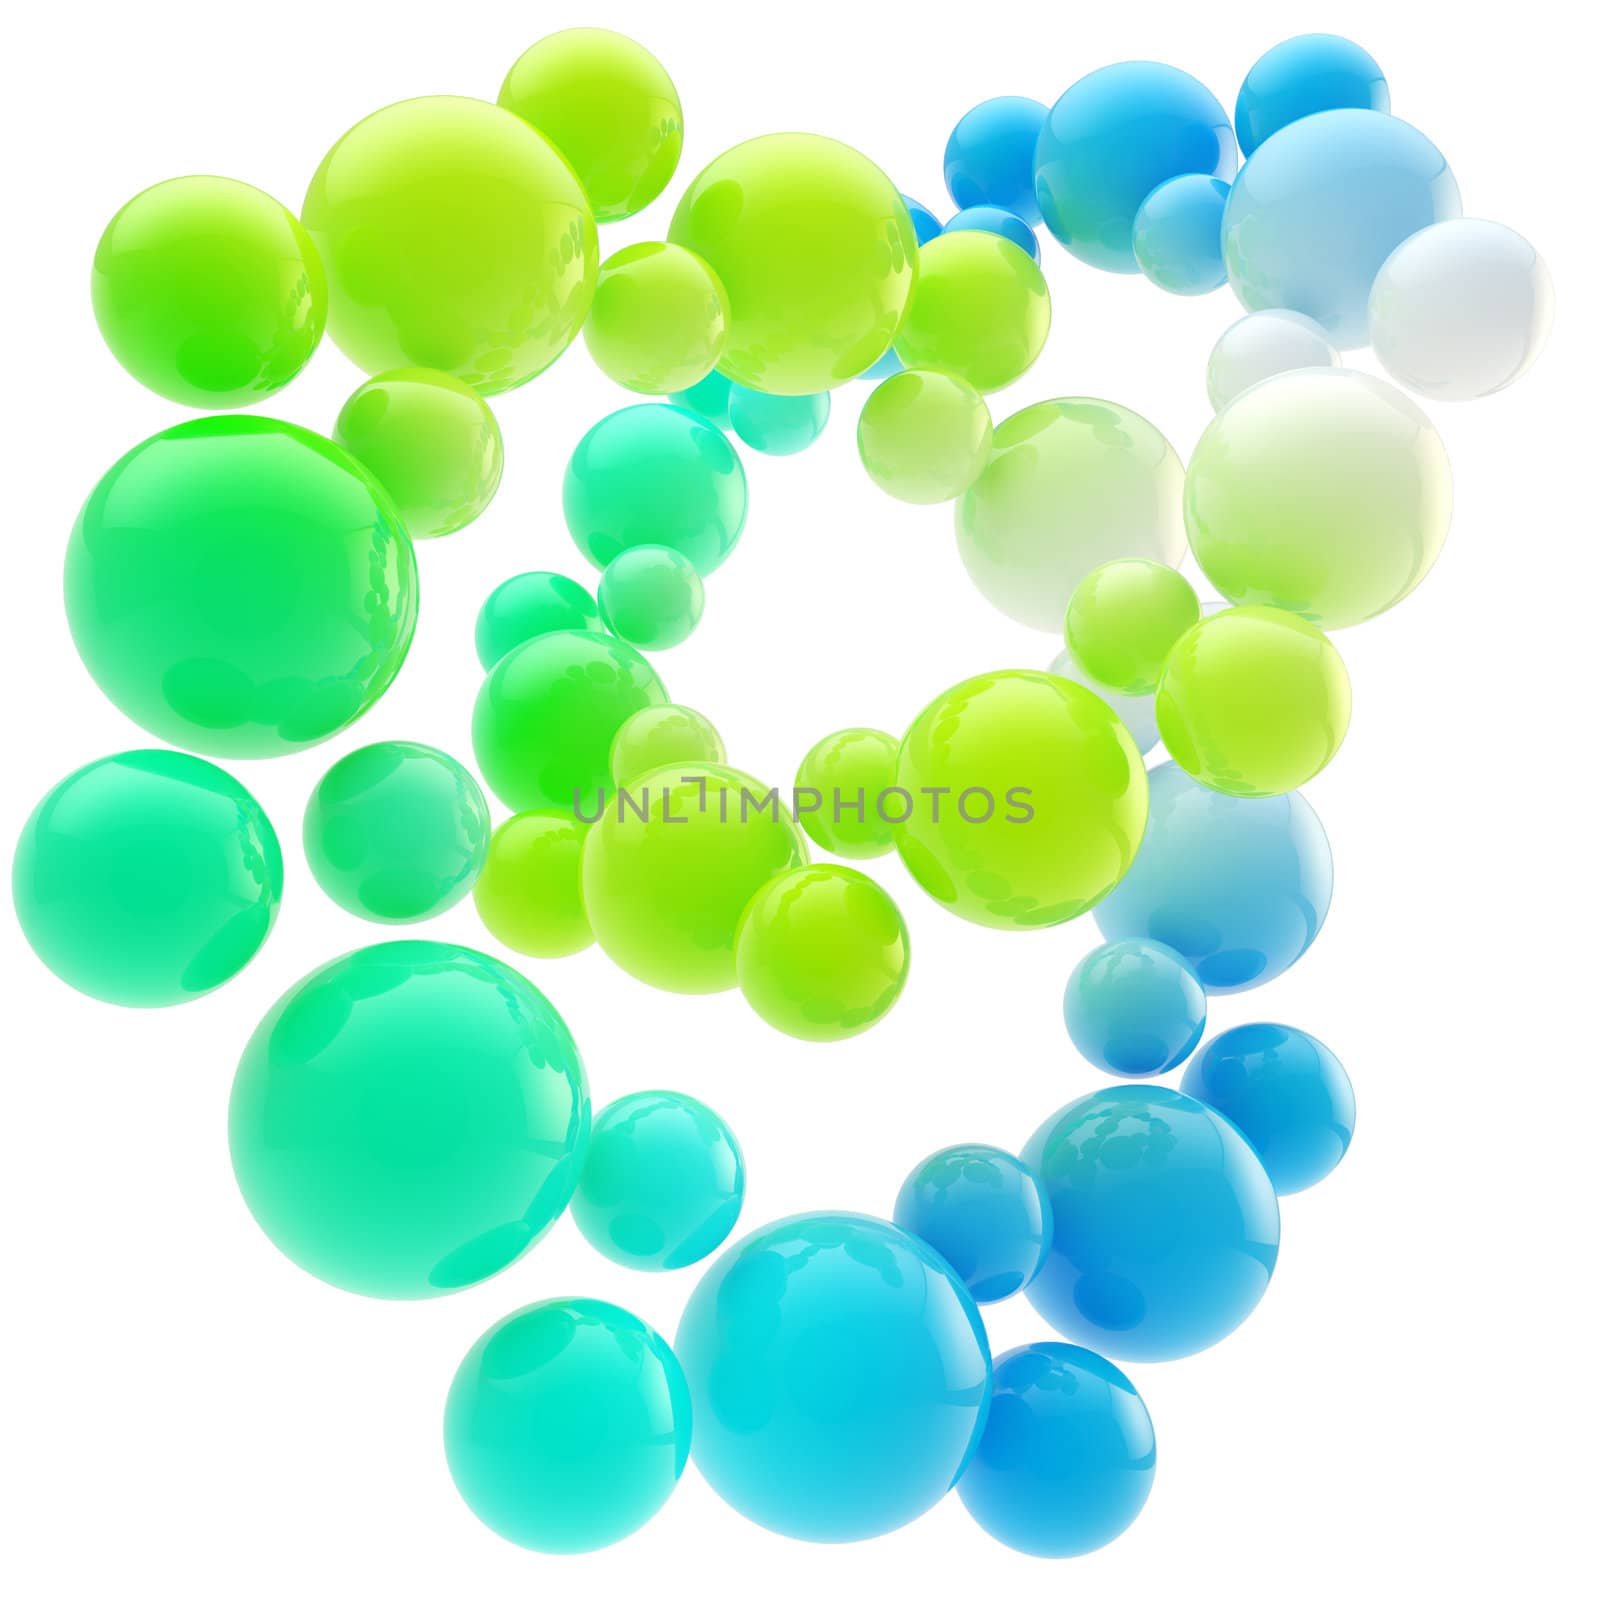 Abstract background made of colorful green and blue glossy spheres